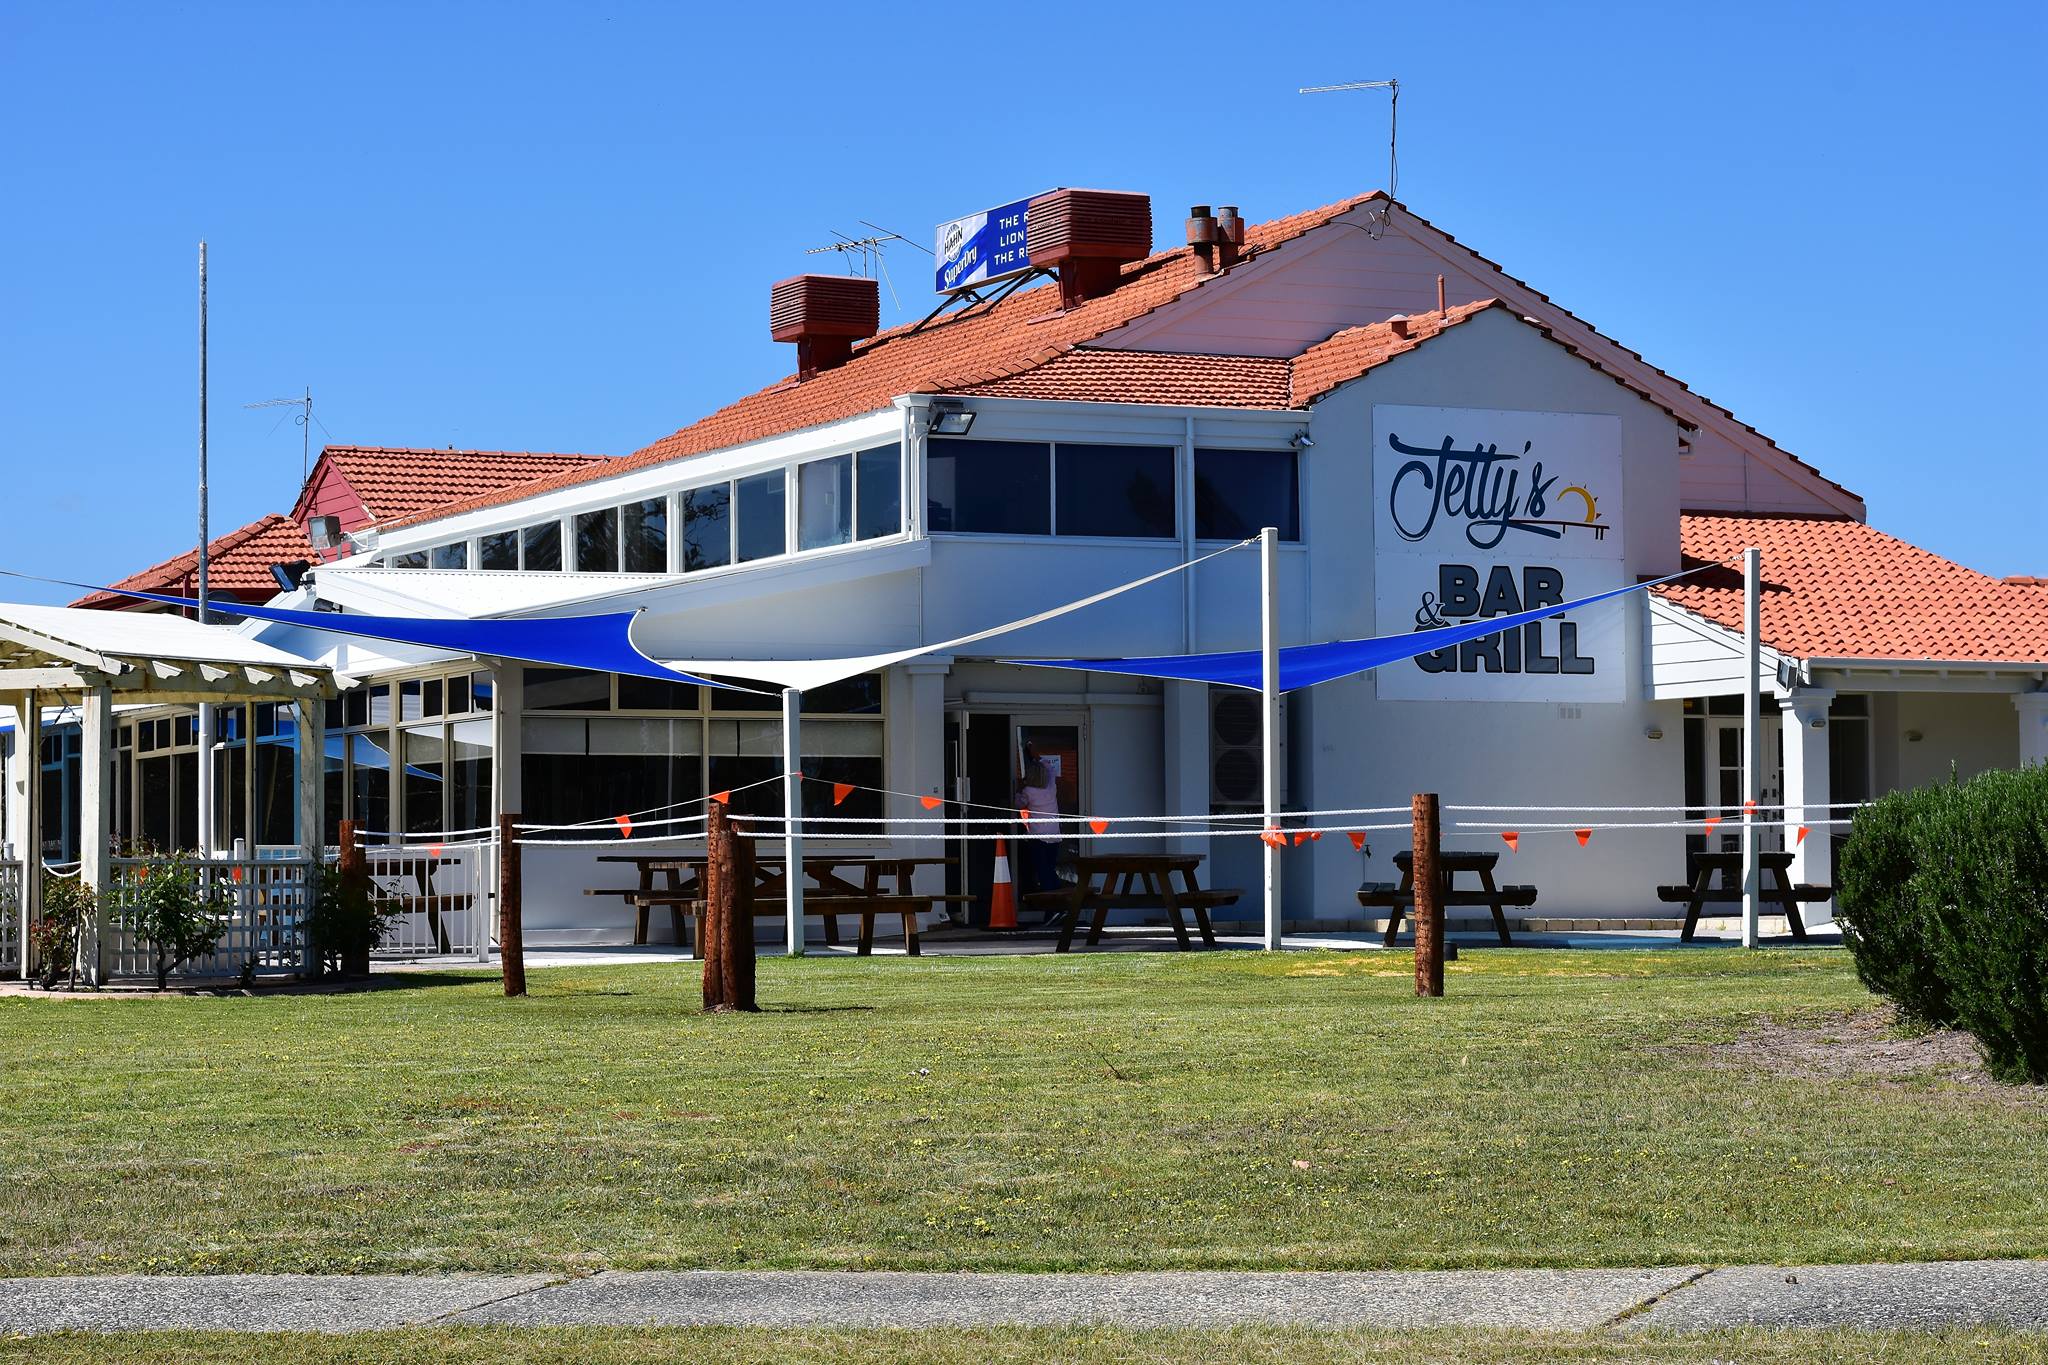 Jetty's Bar and Grill